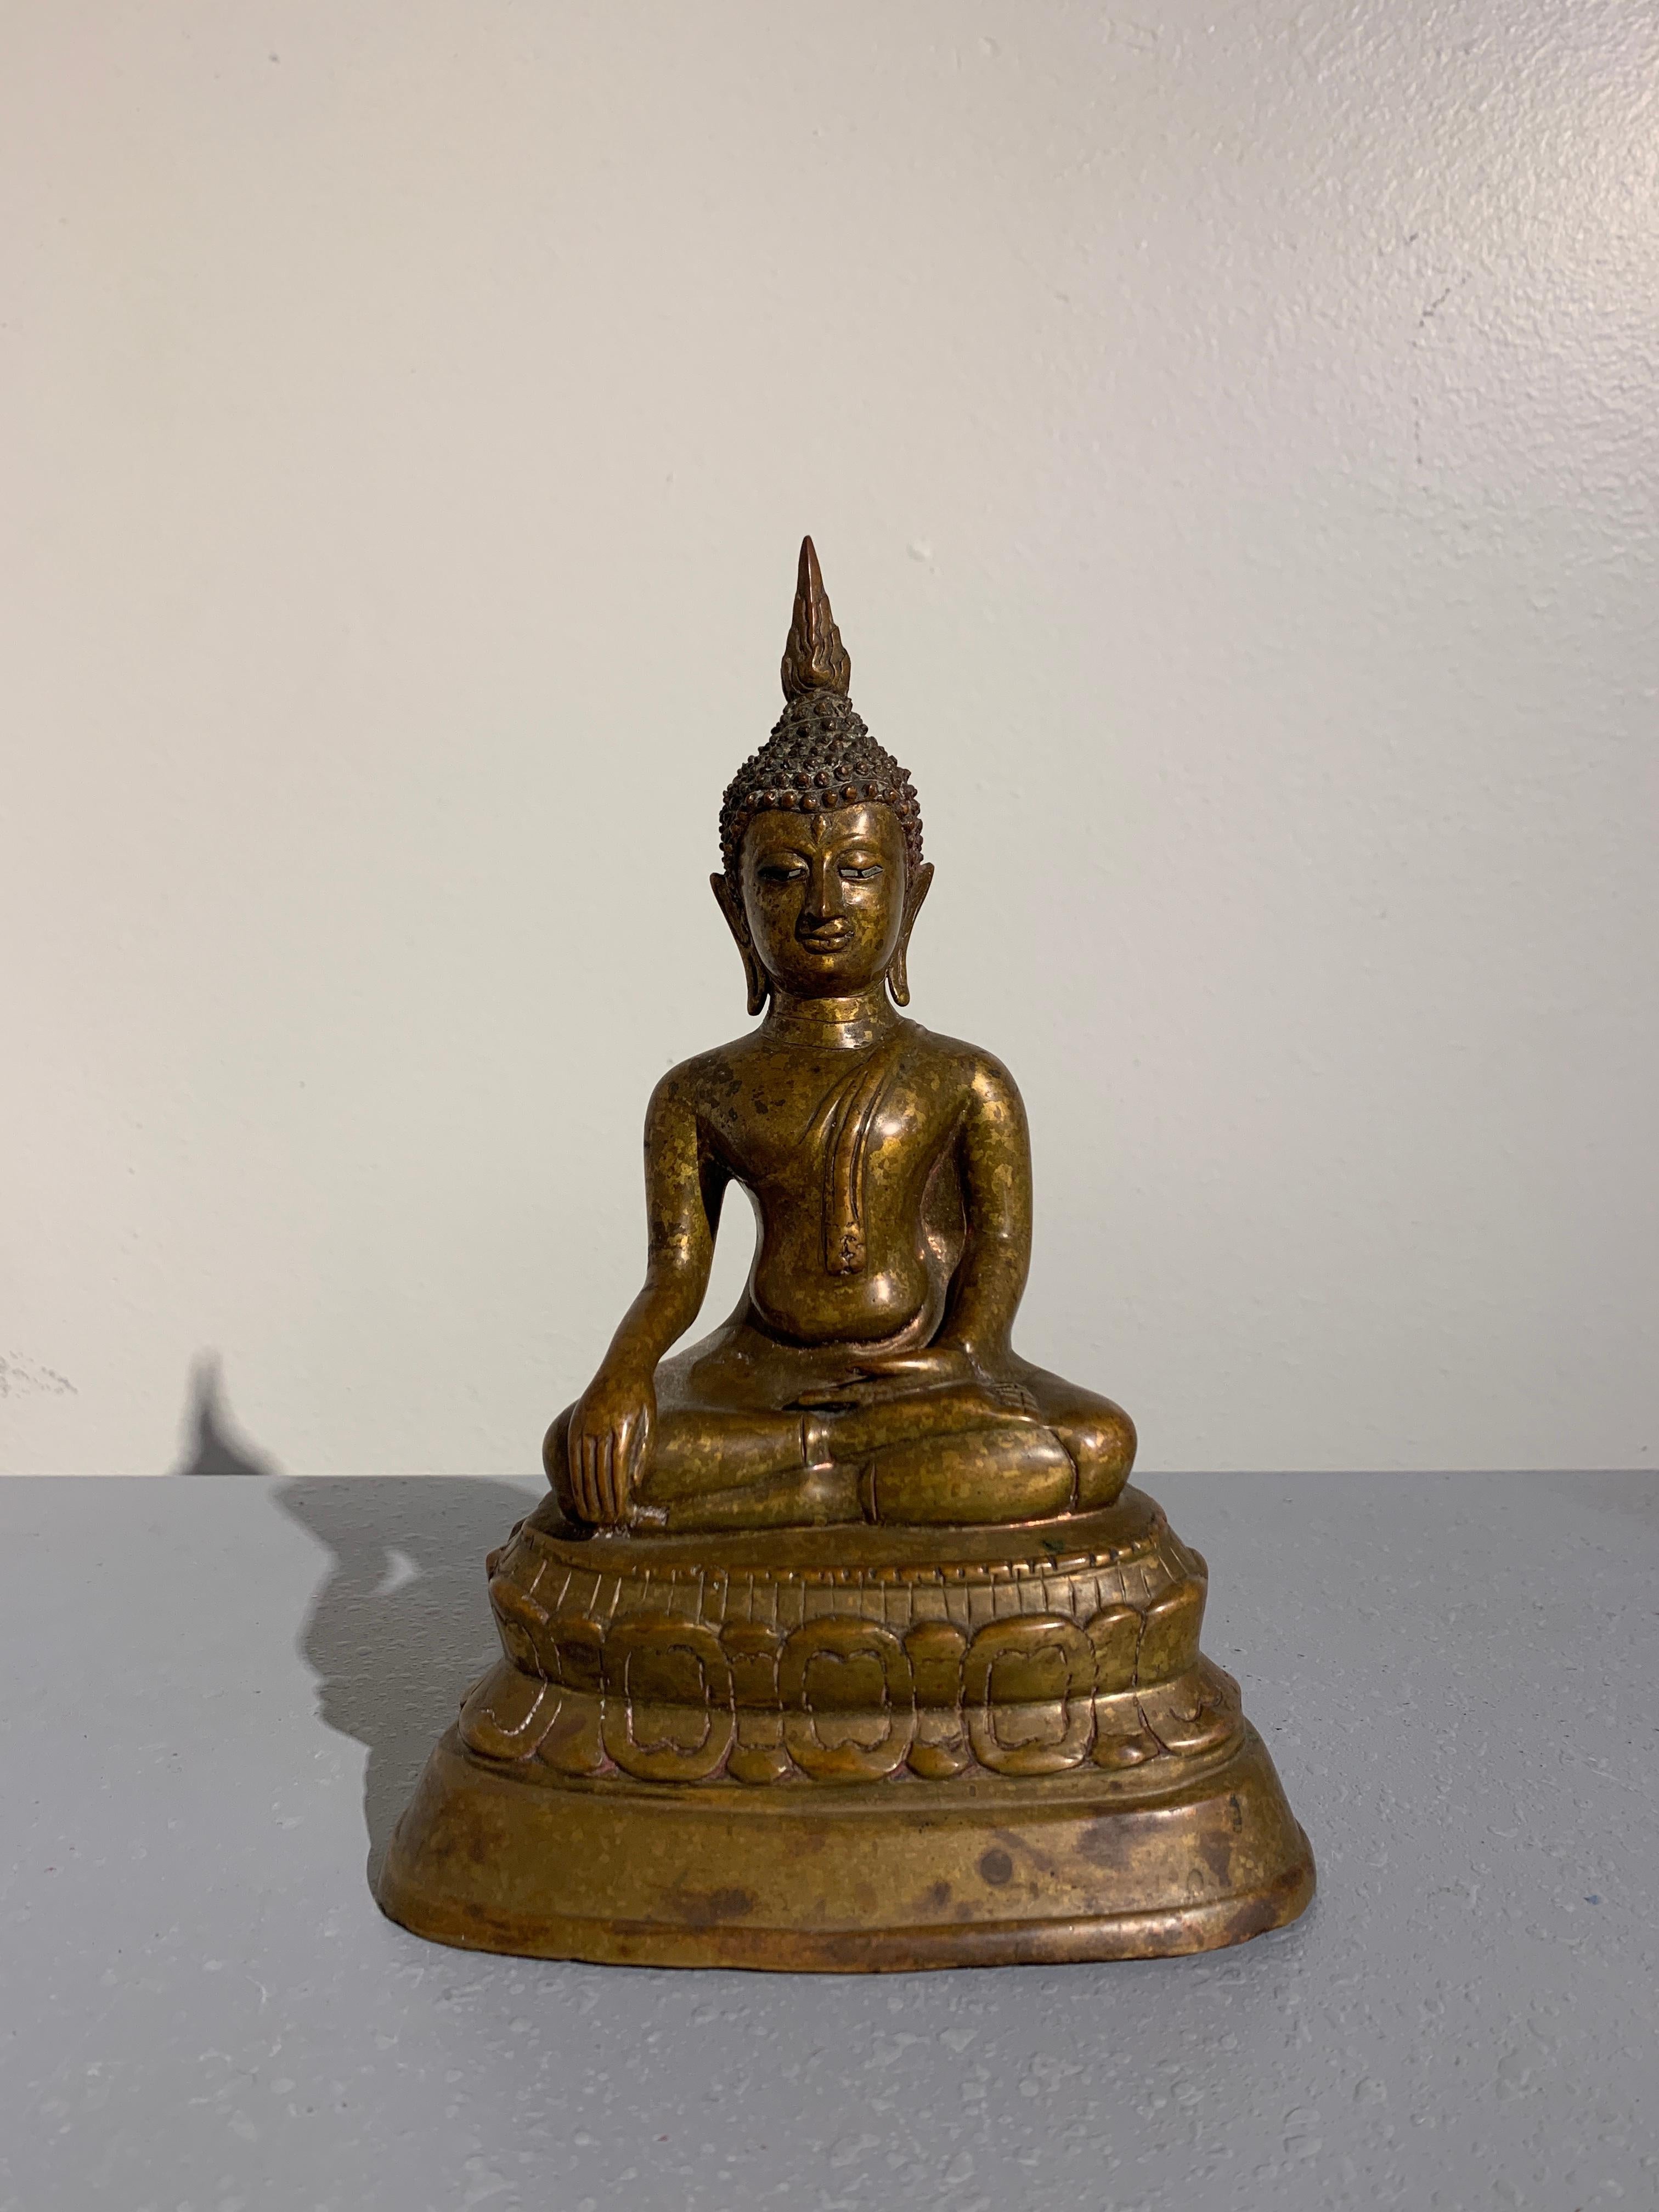 A rare and beautiful Thai cast and gilt bronze seated Buddha with shell inlaid eyes, style of Wat Chedi Luang, Lan Na Kingdom, Northern Thailand, region of Chiang Mai, late 15th century. 

The historical Buddha, Shakyamuni, is portrayed seated in